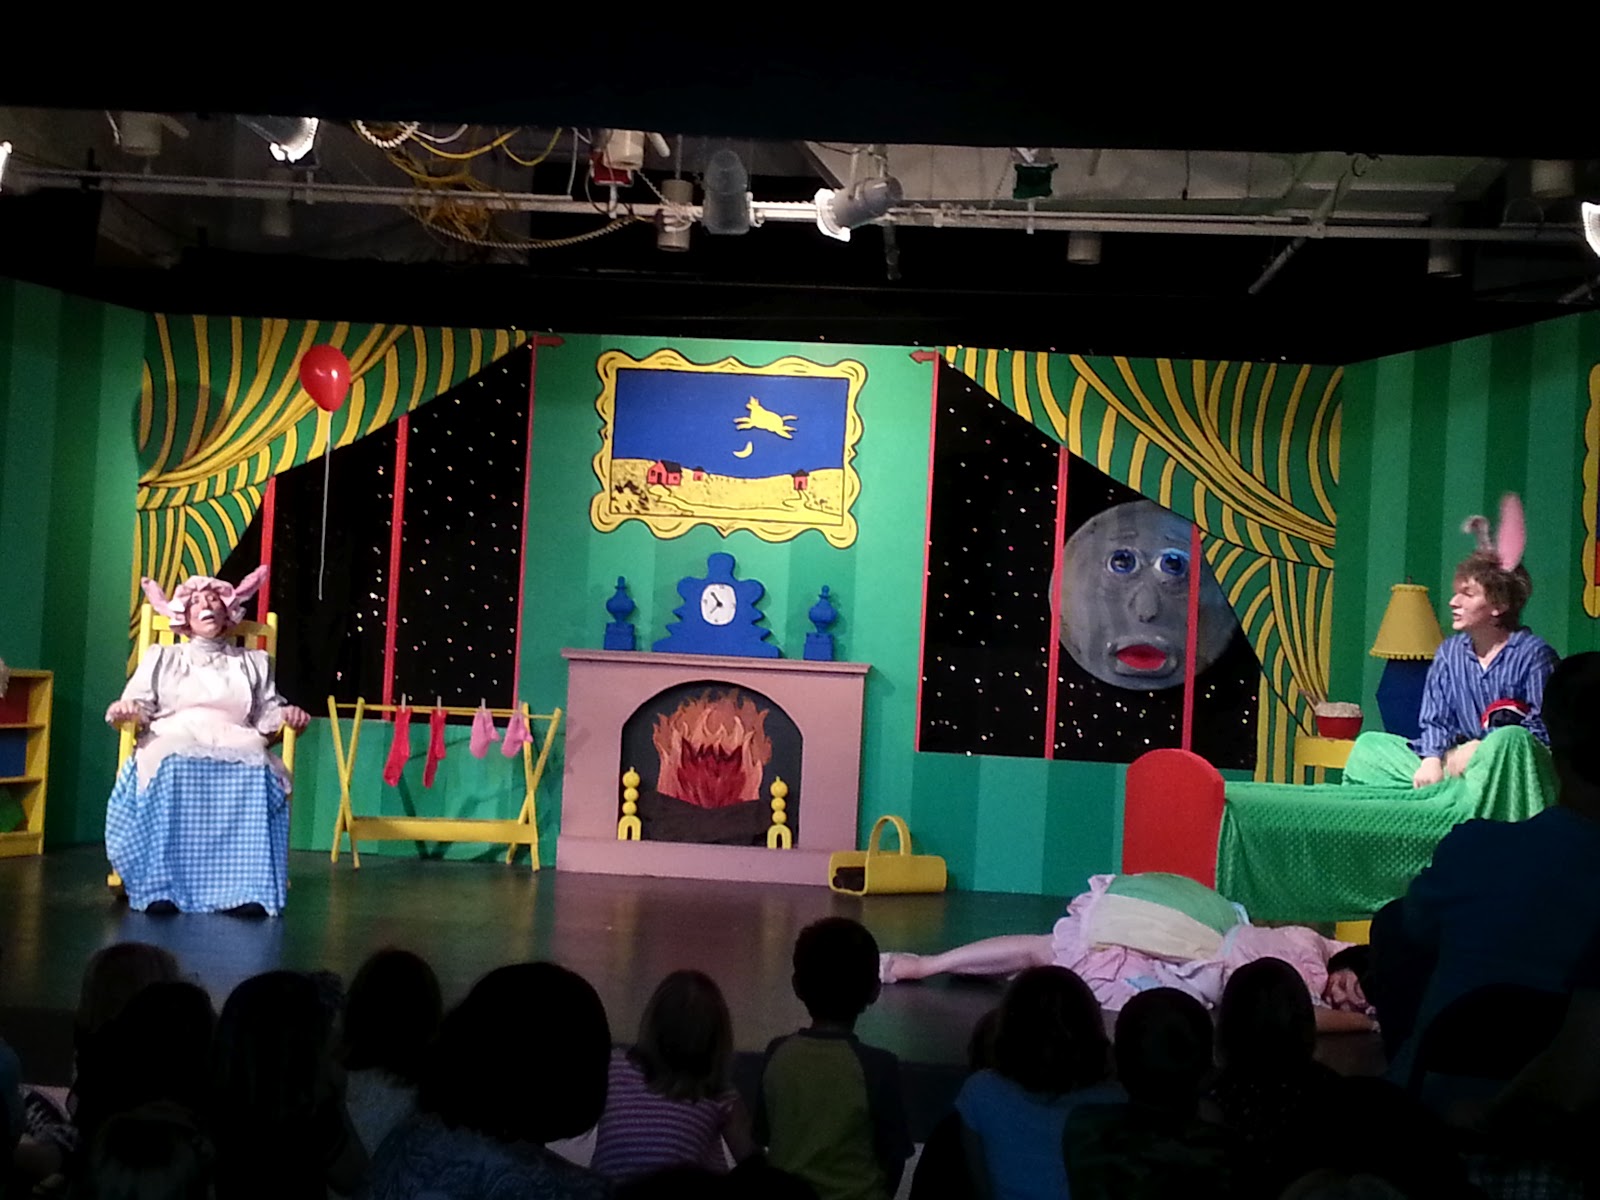 “Goodnight Moon” The Musical | Discovering the World Through My Son's Eyes